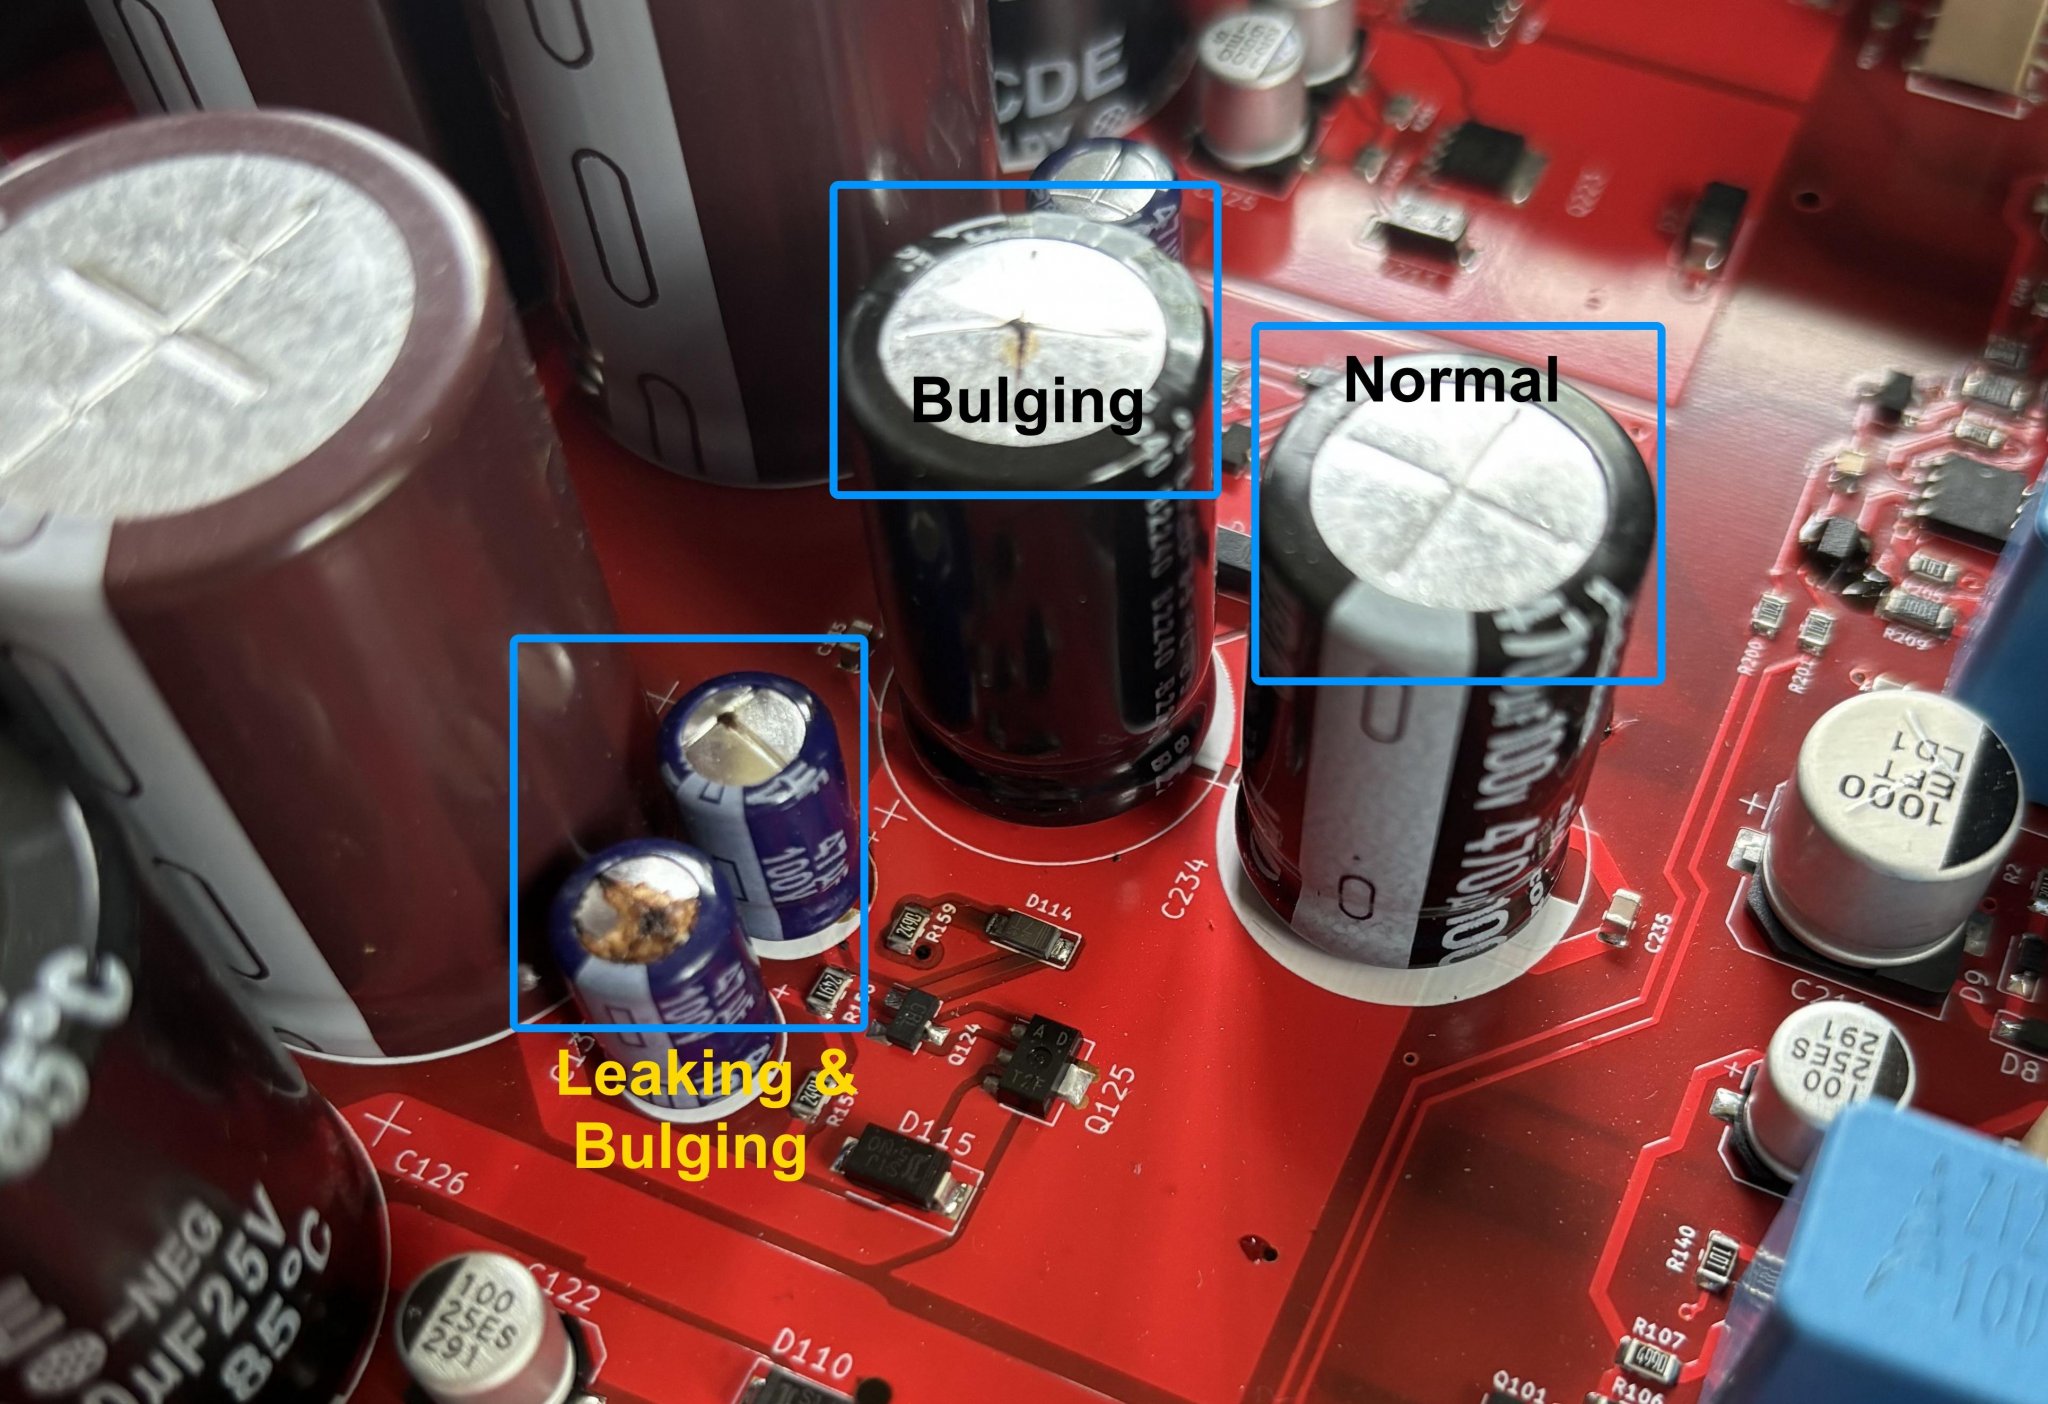 Capacitor_leaking_bulging-annotated_cropped.jpg